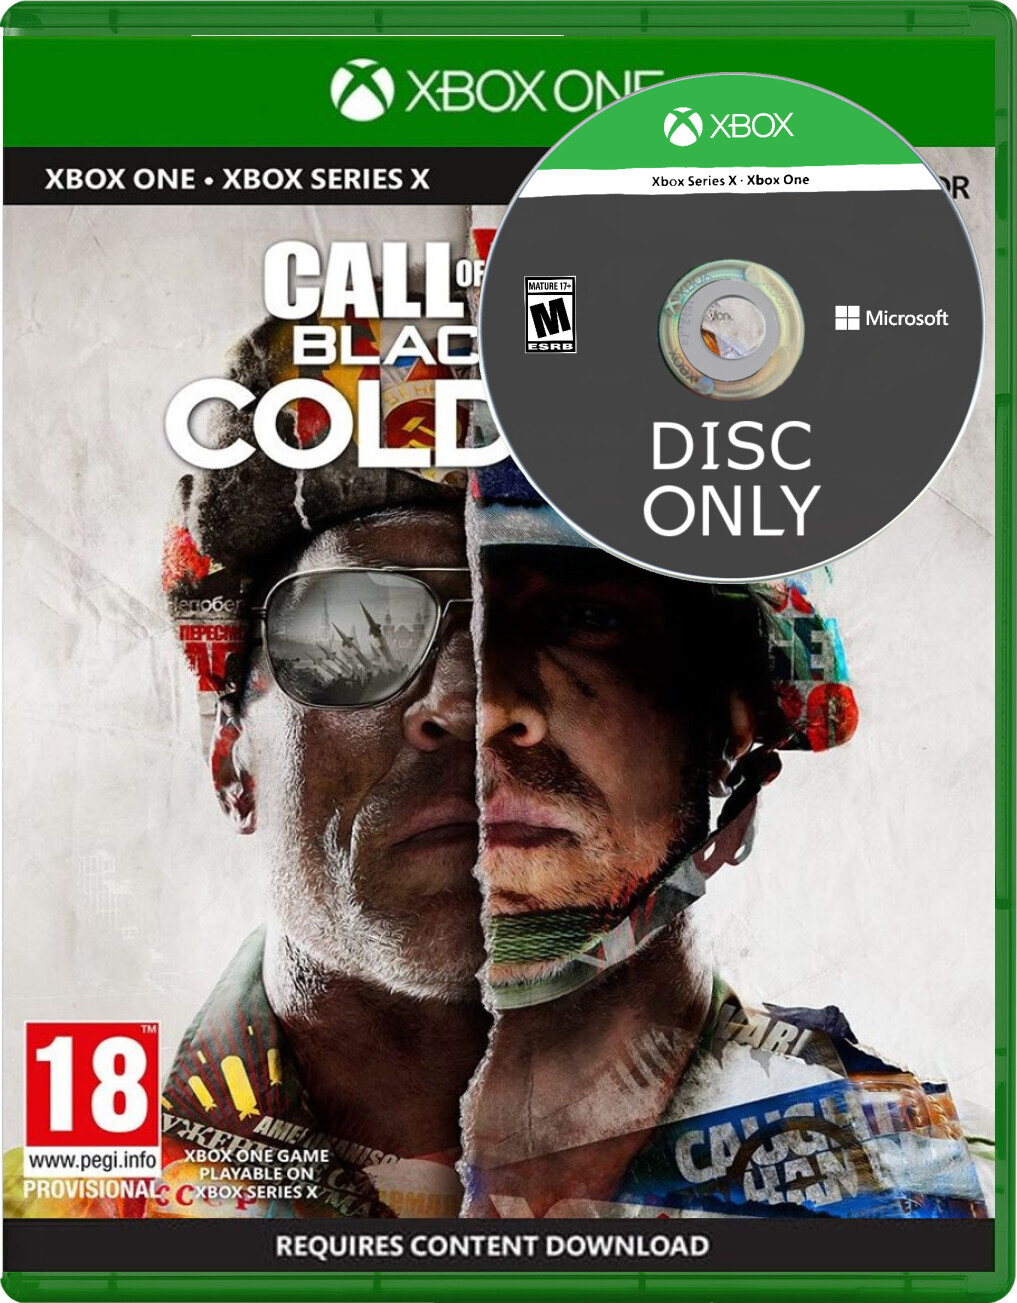 Call of Duty: Black Ops Cold War - Disc Only Kopen | Xbox Series X Games